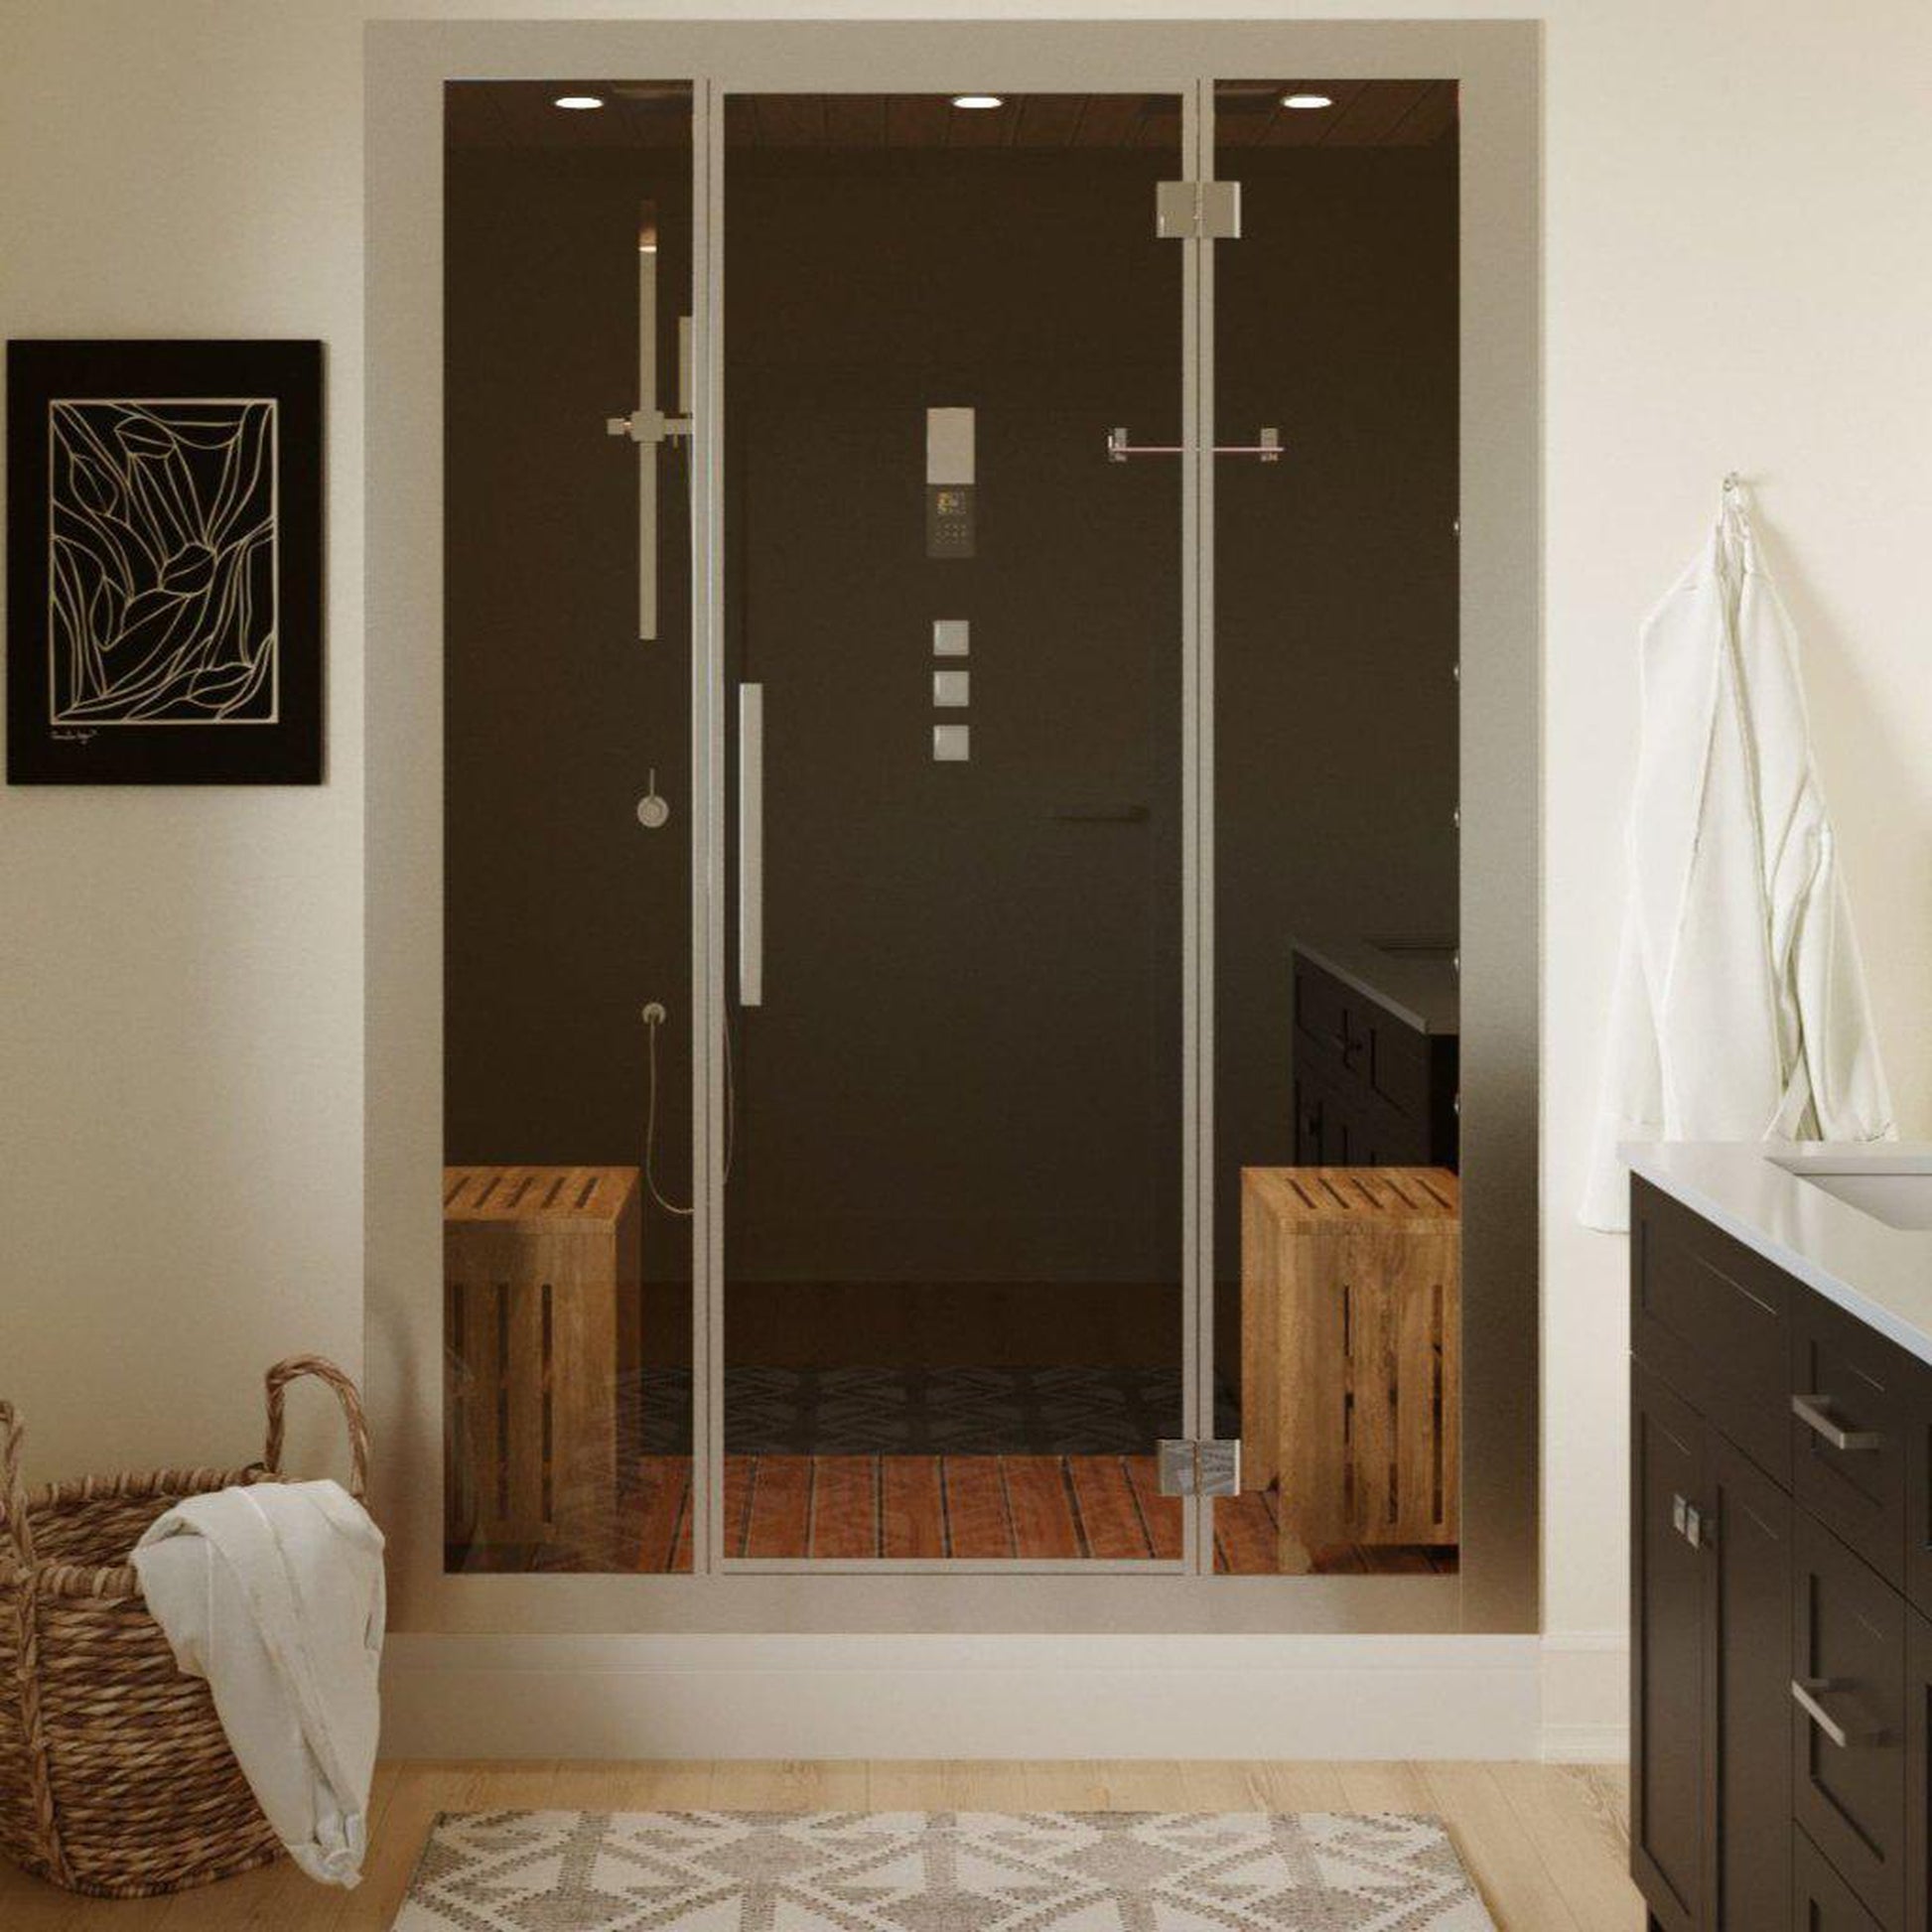 Platinum 59" x 32" x 87" Two-Person Black Framed Rectangle Walk-In Steam Shower With Hinged Door, 20 Massage Jets & LED Chromatherapy Lighting